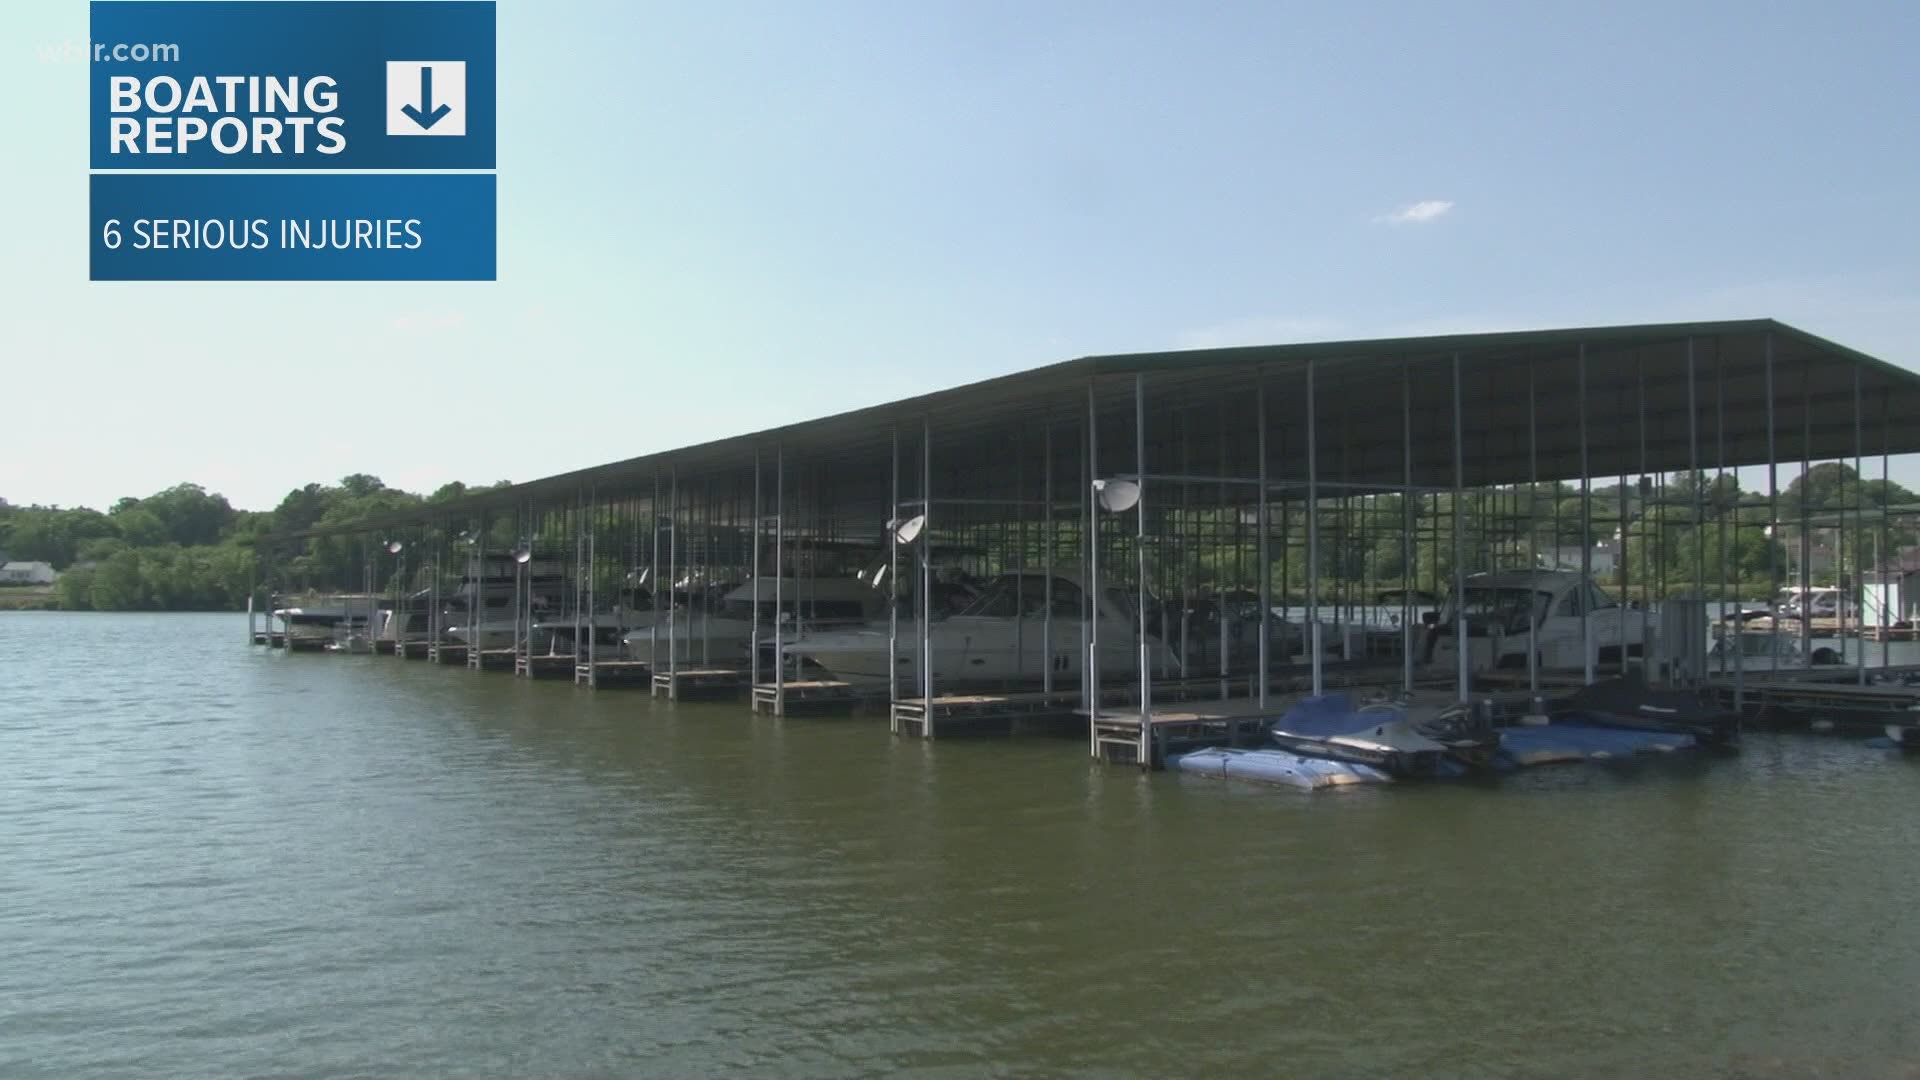 TWRA said there were no boating deaths reported over the Fourth of July weekend.